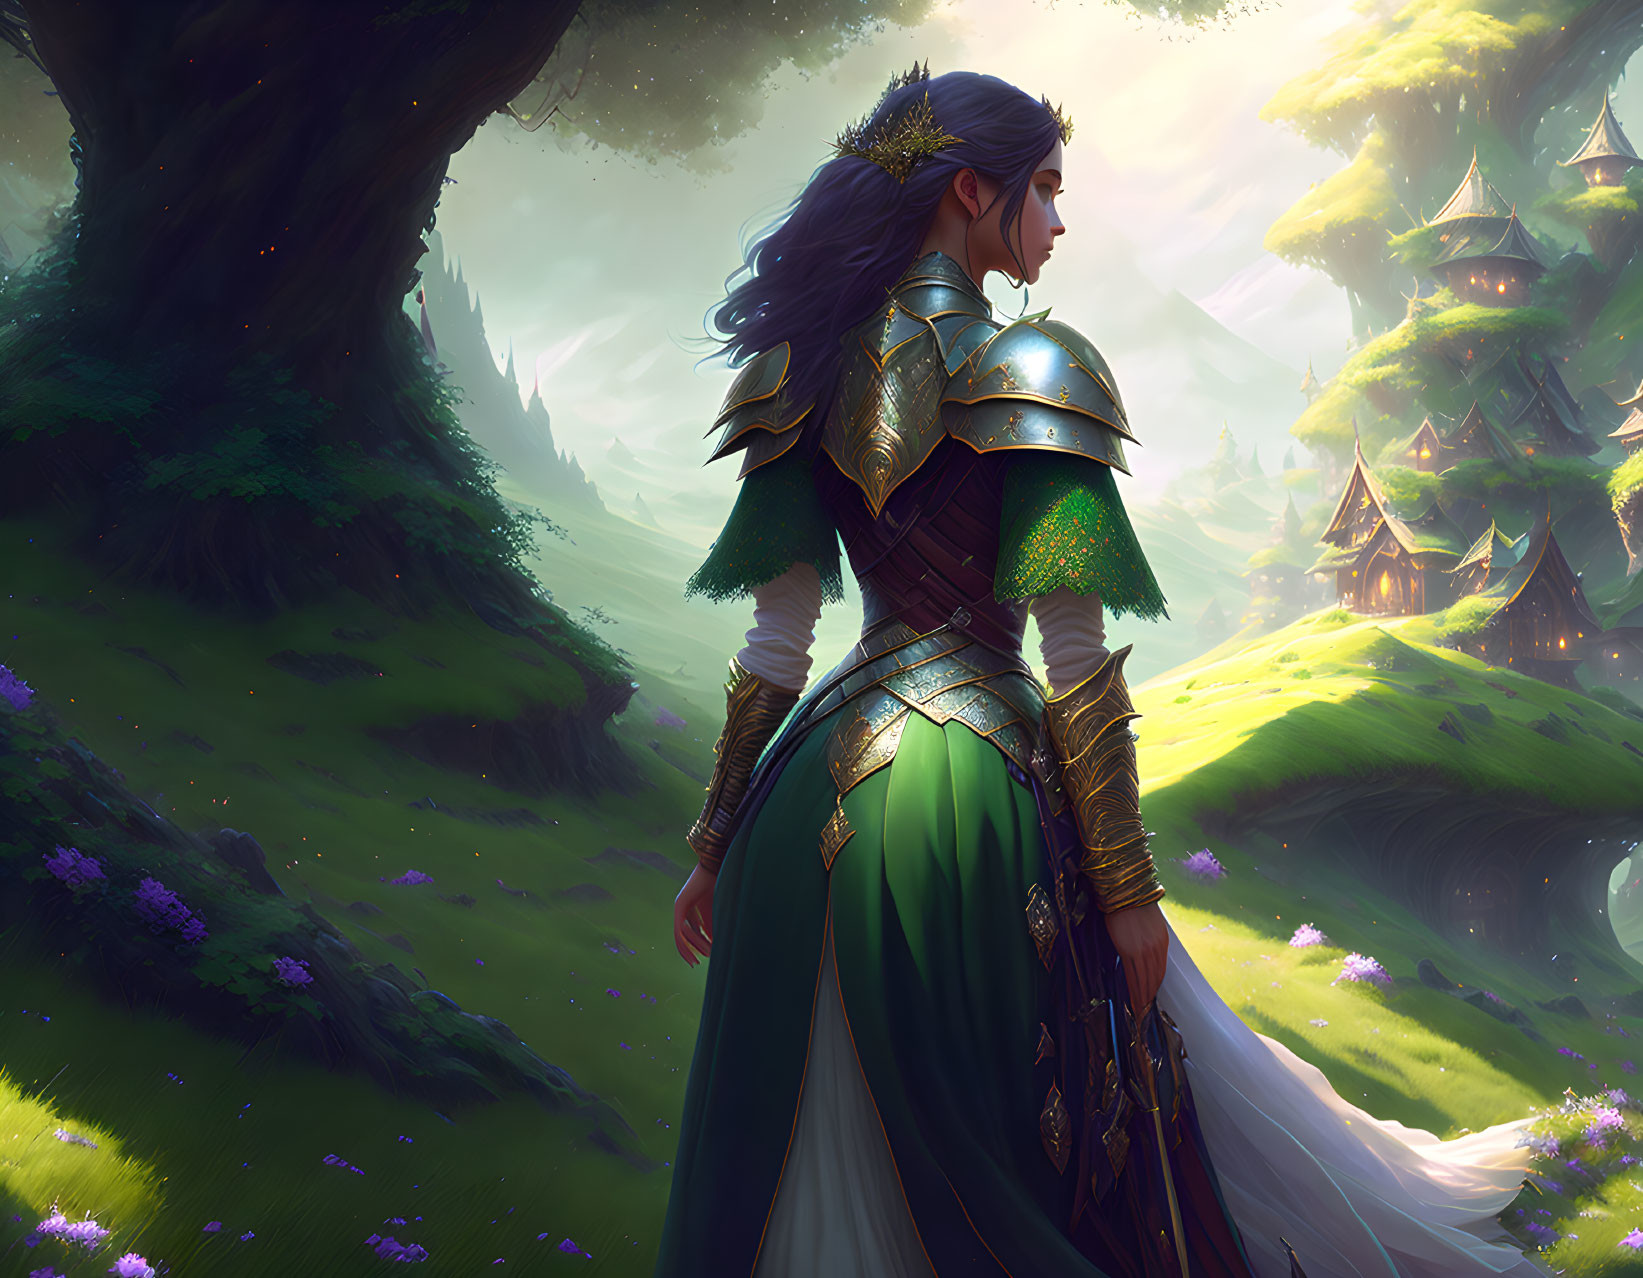 Female warrior in green armor surveys mystical forest with treetop houses